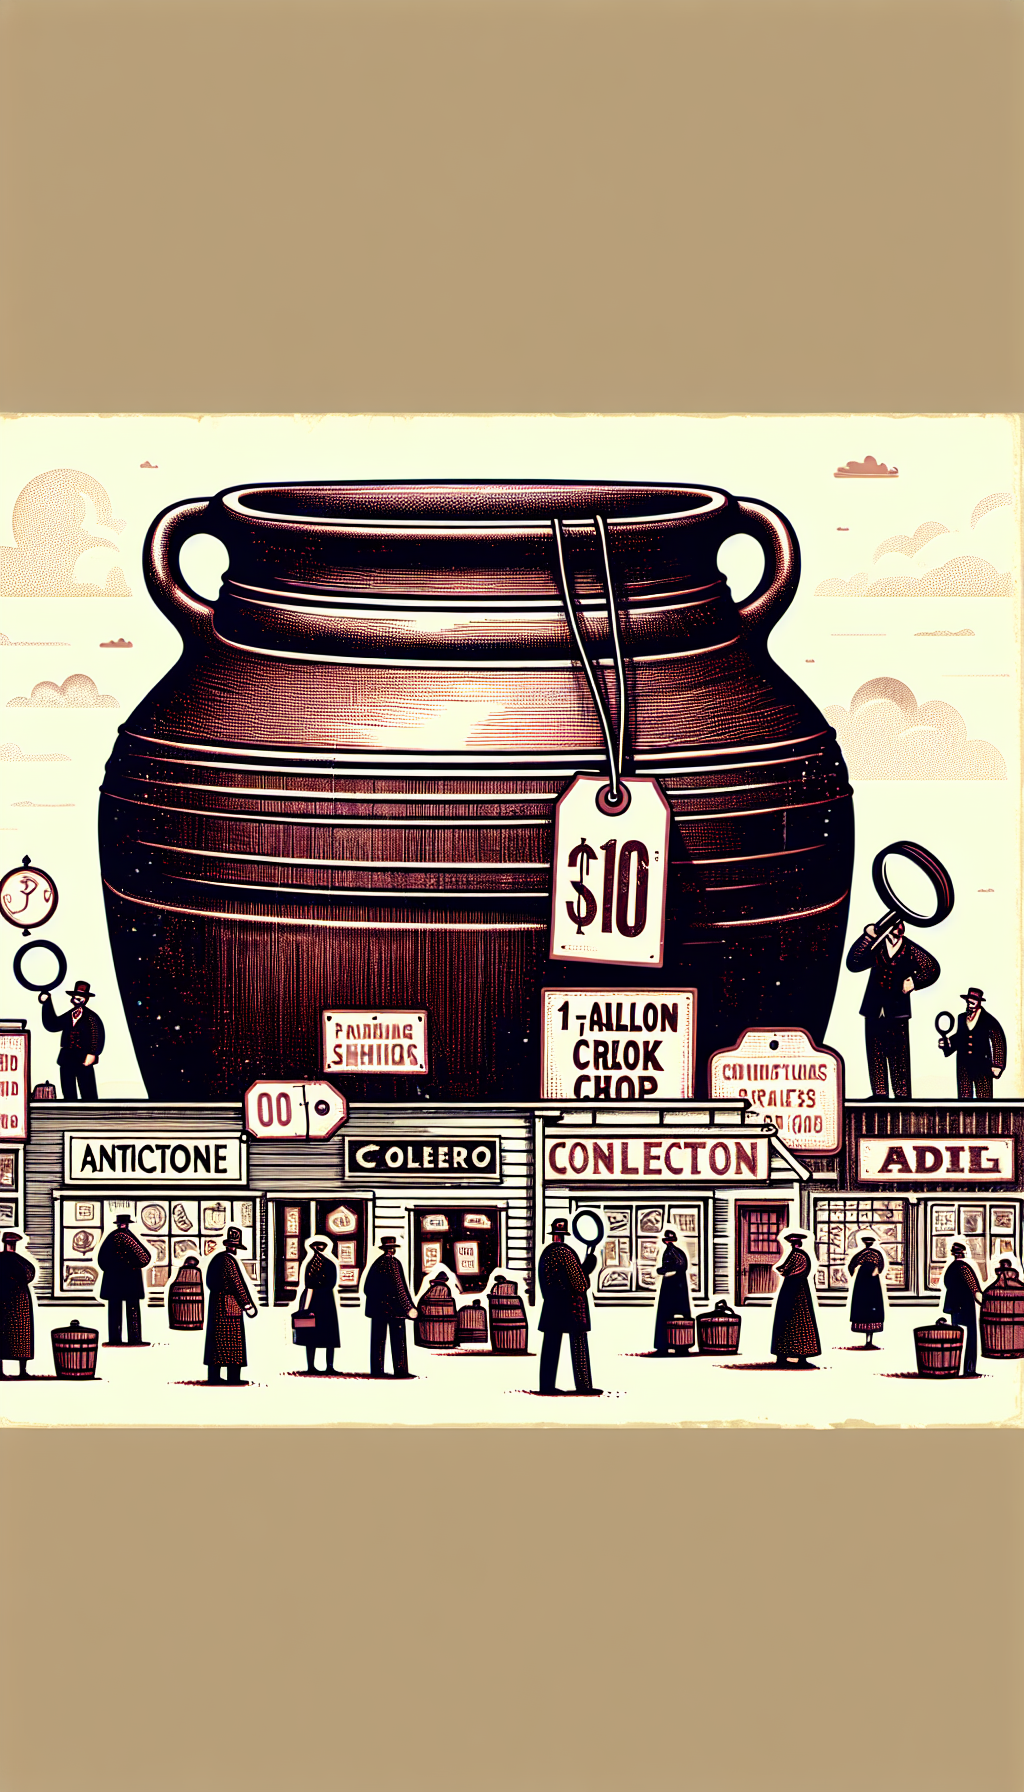 An illustration of a whimsical, oversized 10-gallon crock towering over antique shops and collectors holding magnifying glasses and price tags. The crock's textured finish and classic design elements, drawn in a vintage woodcut style, contrast with its surrounding in a modern, flat design, symbolizing its timeless value and significant size in the collectors' world.